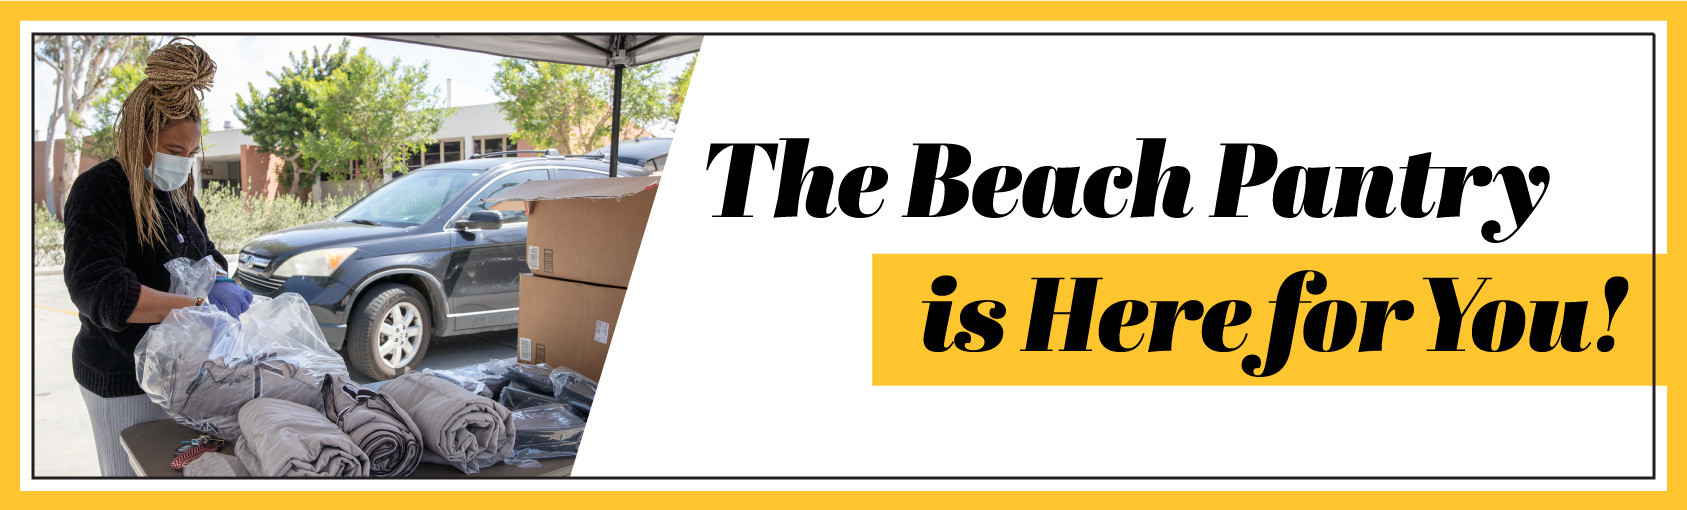 The Beach Pantry is Here for You! banner